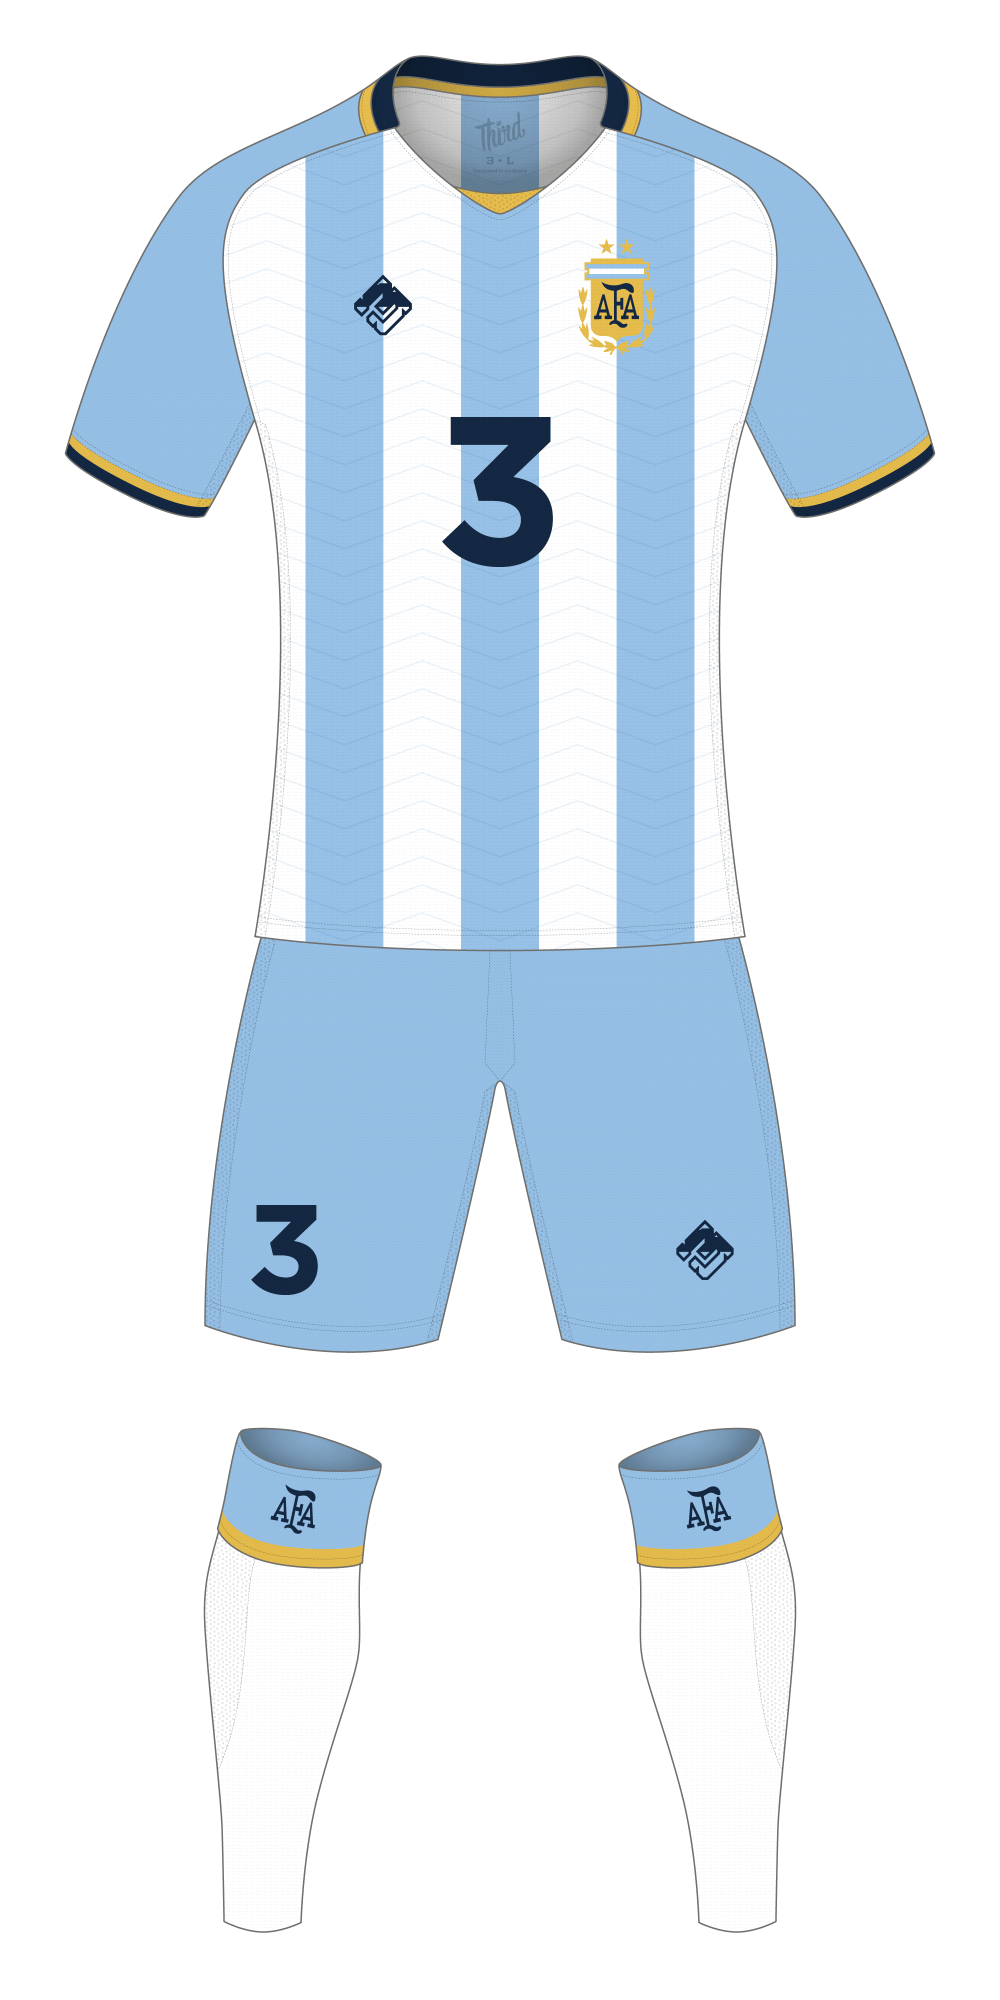 Argentina World Cup 2018 concept